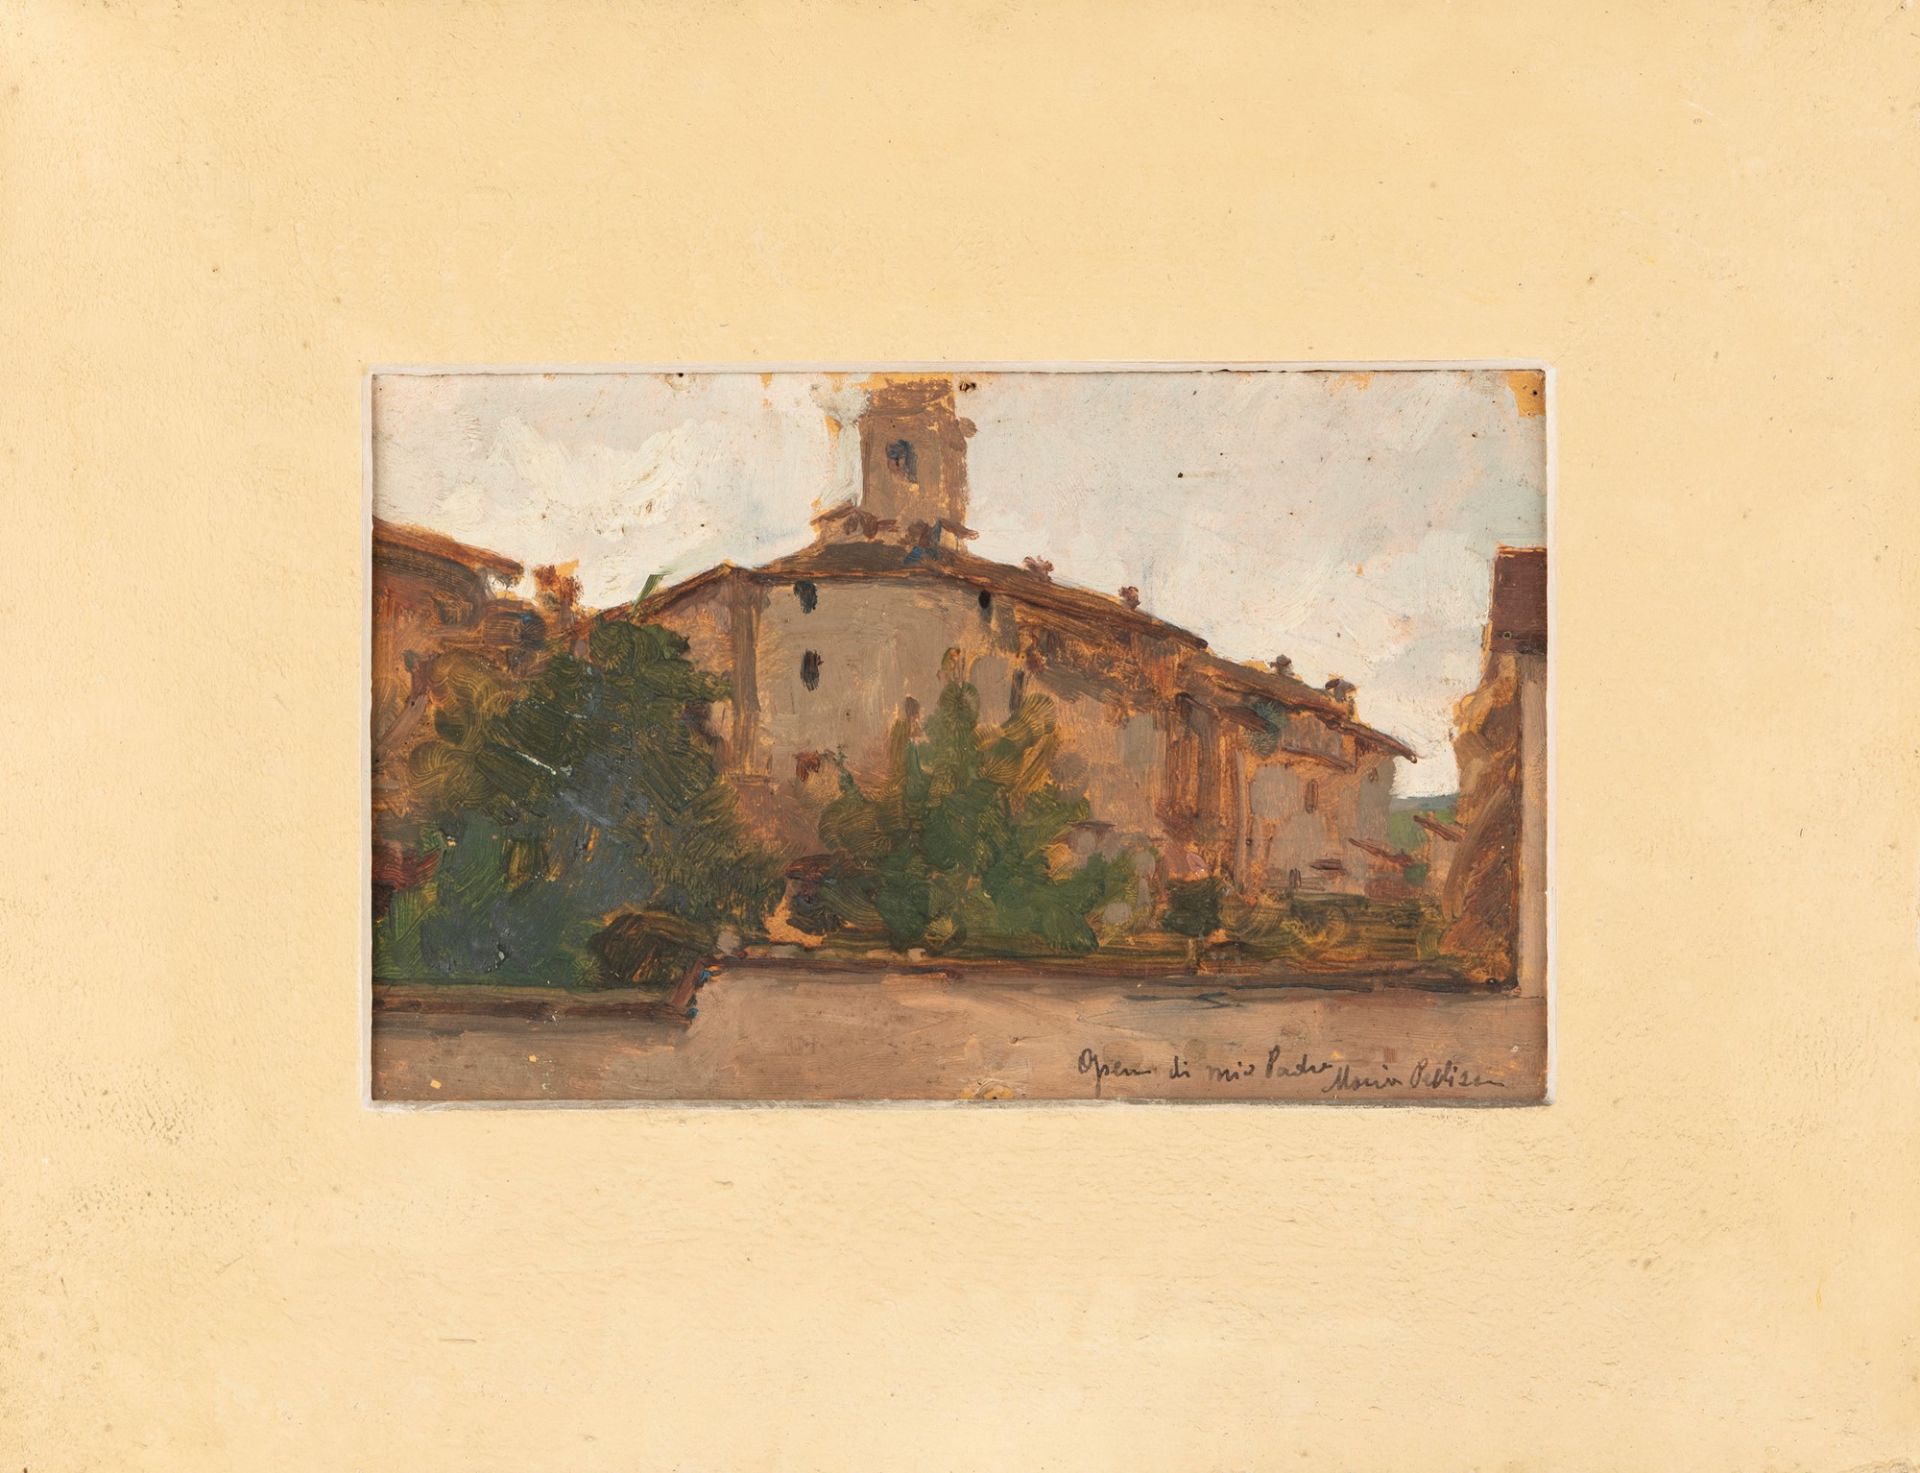 Giuseppe Pellizza da Volpedo (Volpedo 1868-1907) - The town of Volpedo with the church of San Piet - Image 2 of 3